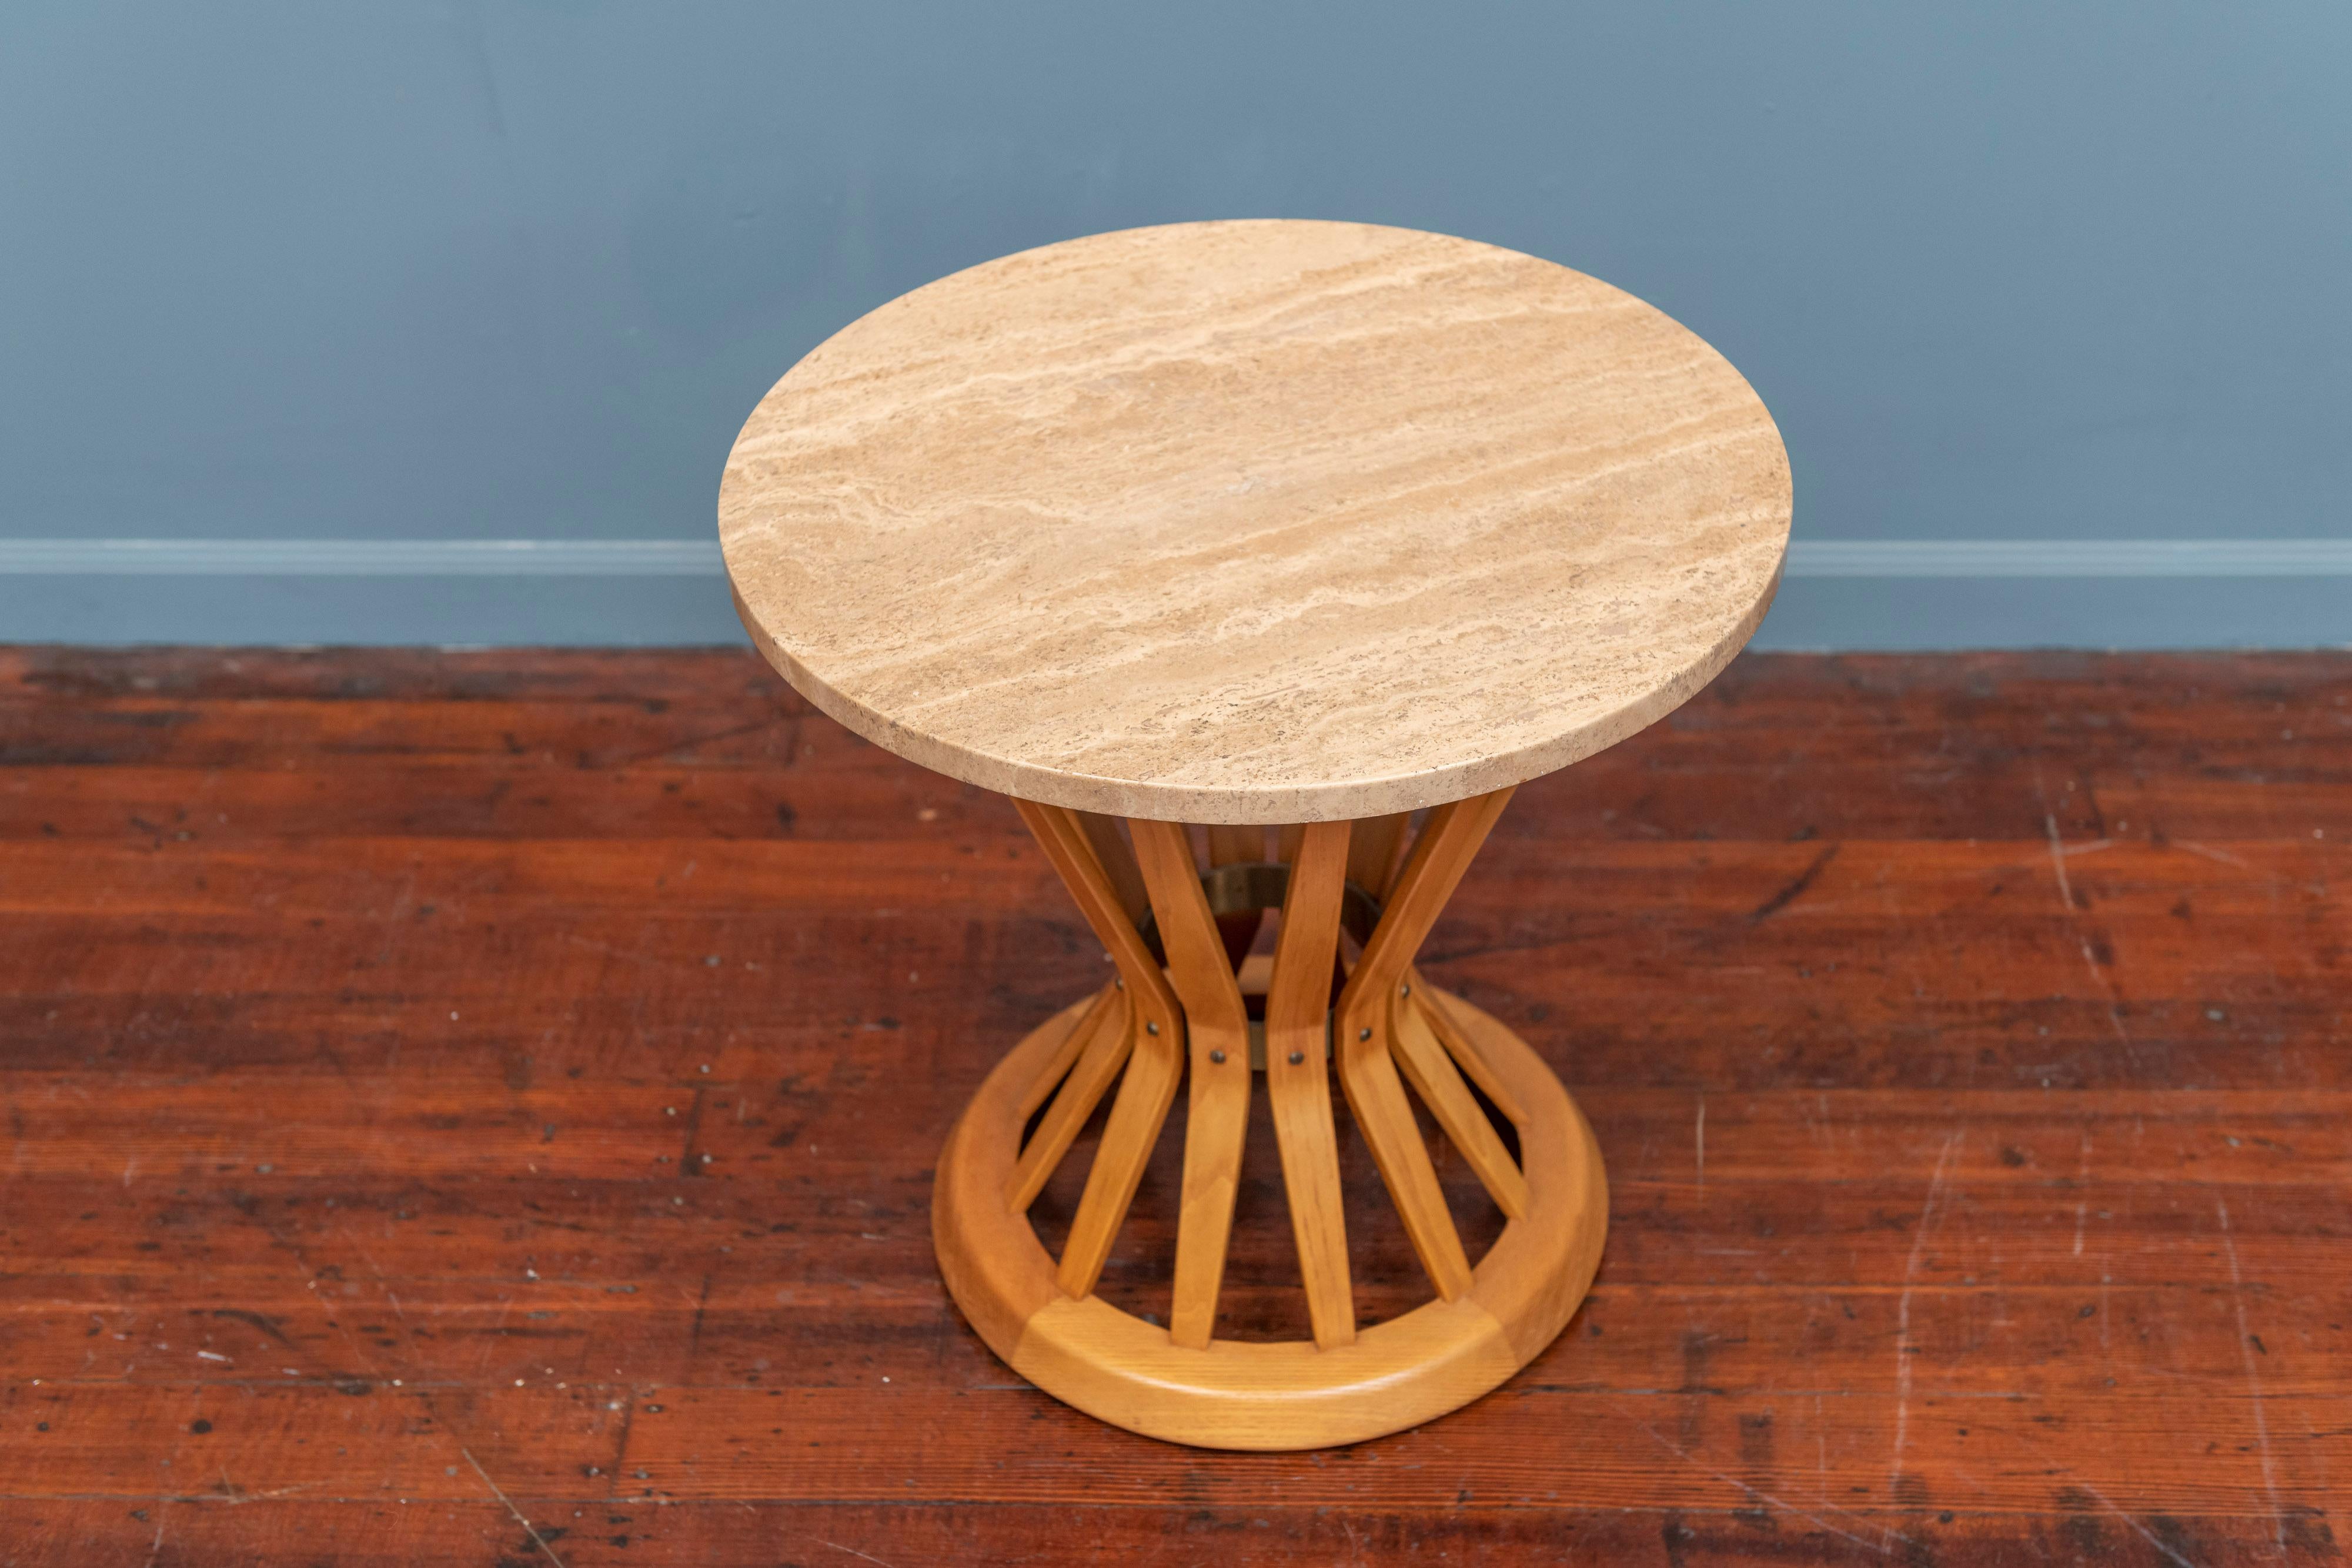 Edward Wormley design sheaf of wheat table for Dunbar Furniture, Berne Indiana.
Lovely one owner travertine top side table in excellent original condition, labeled.